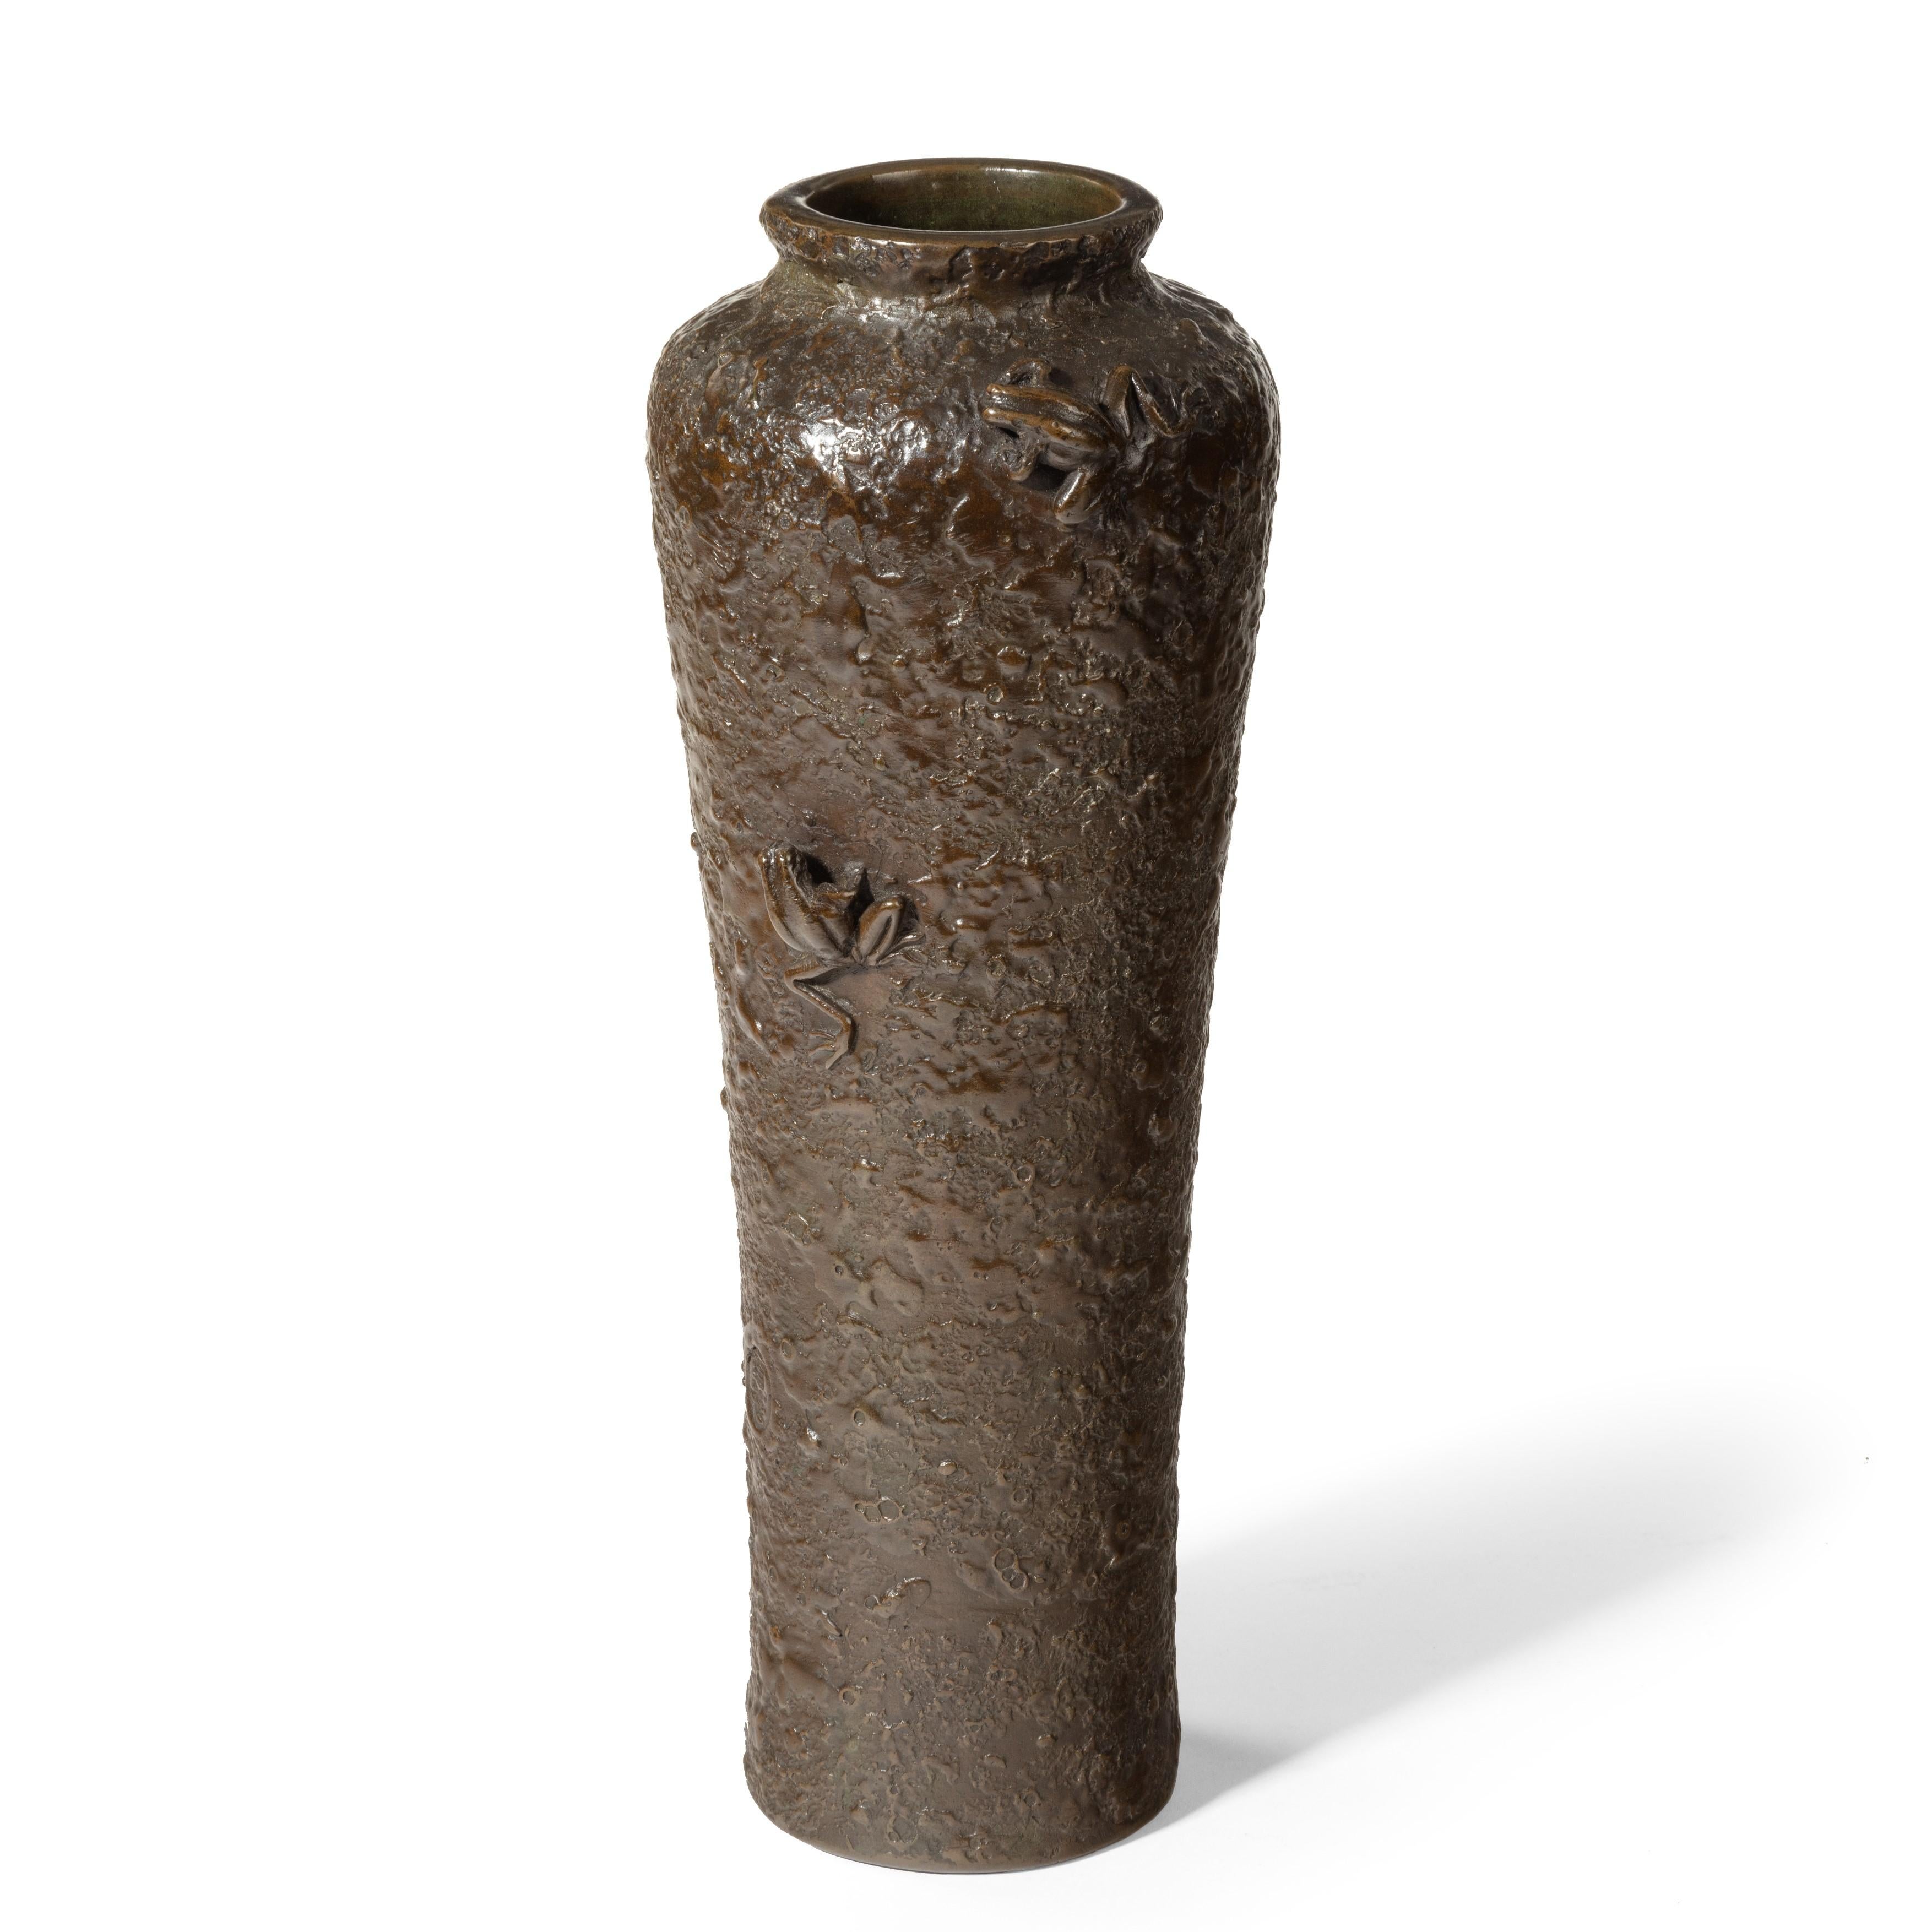 A Meiji period bronze vase with two frogs against a rough textured ground, signed ‘Hyakusei’, Japanese, circa 1880.
   